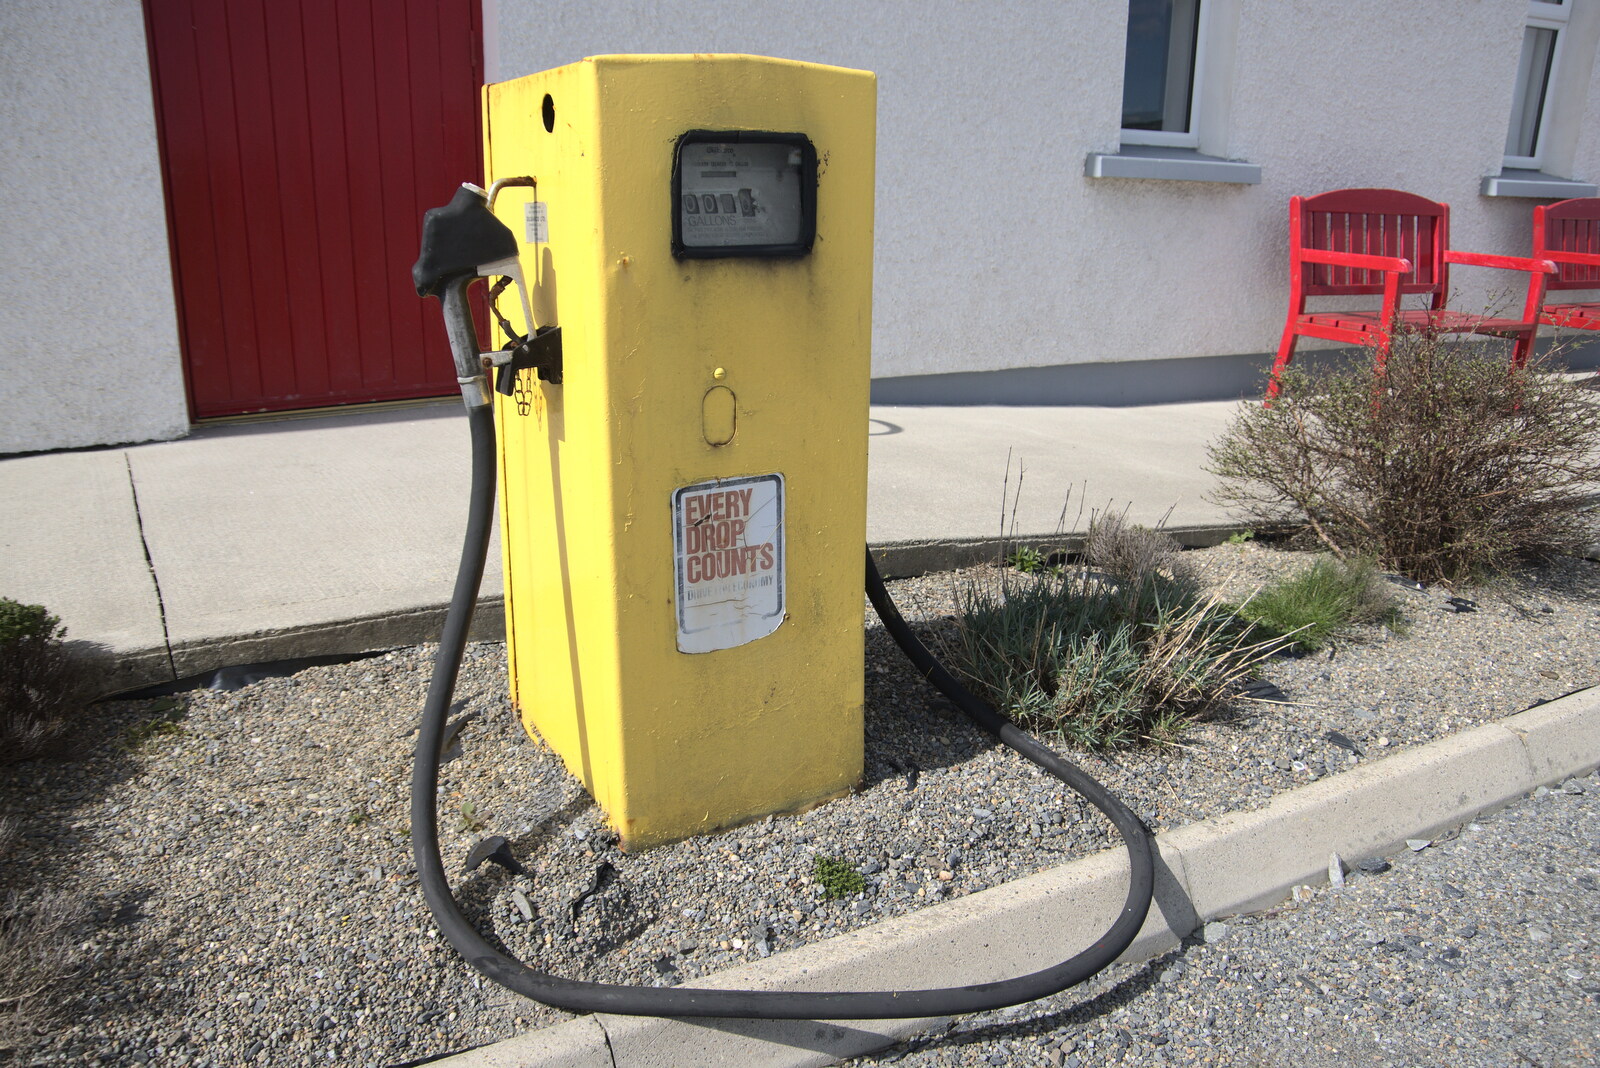 Greencastle, Doagh and Malin Head, County Donegal, Ireland - 19th April 2022: An old petrol pump